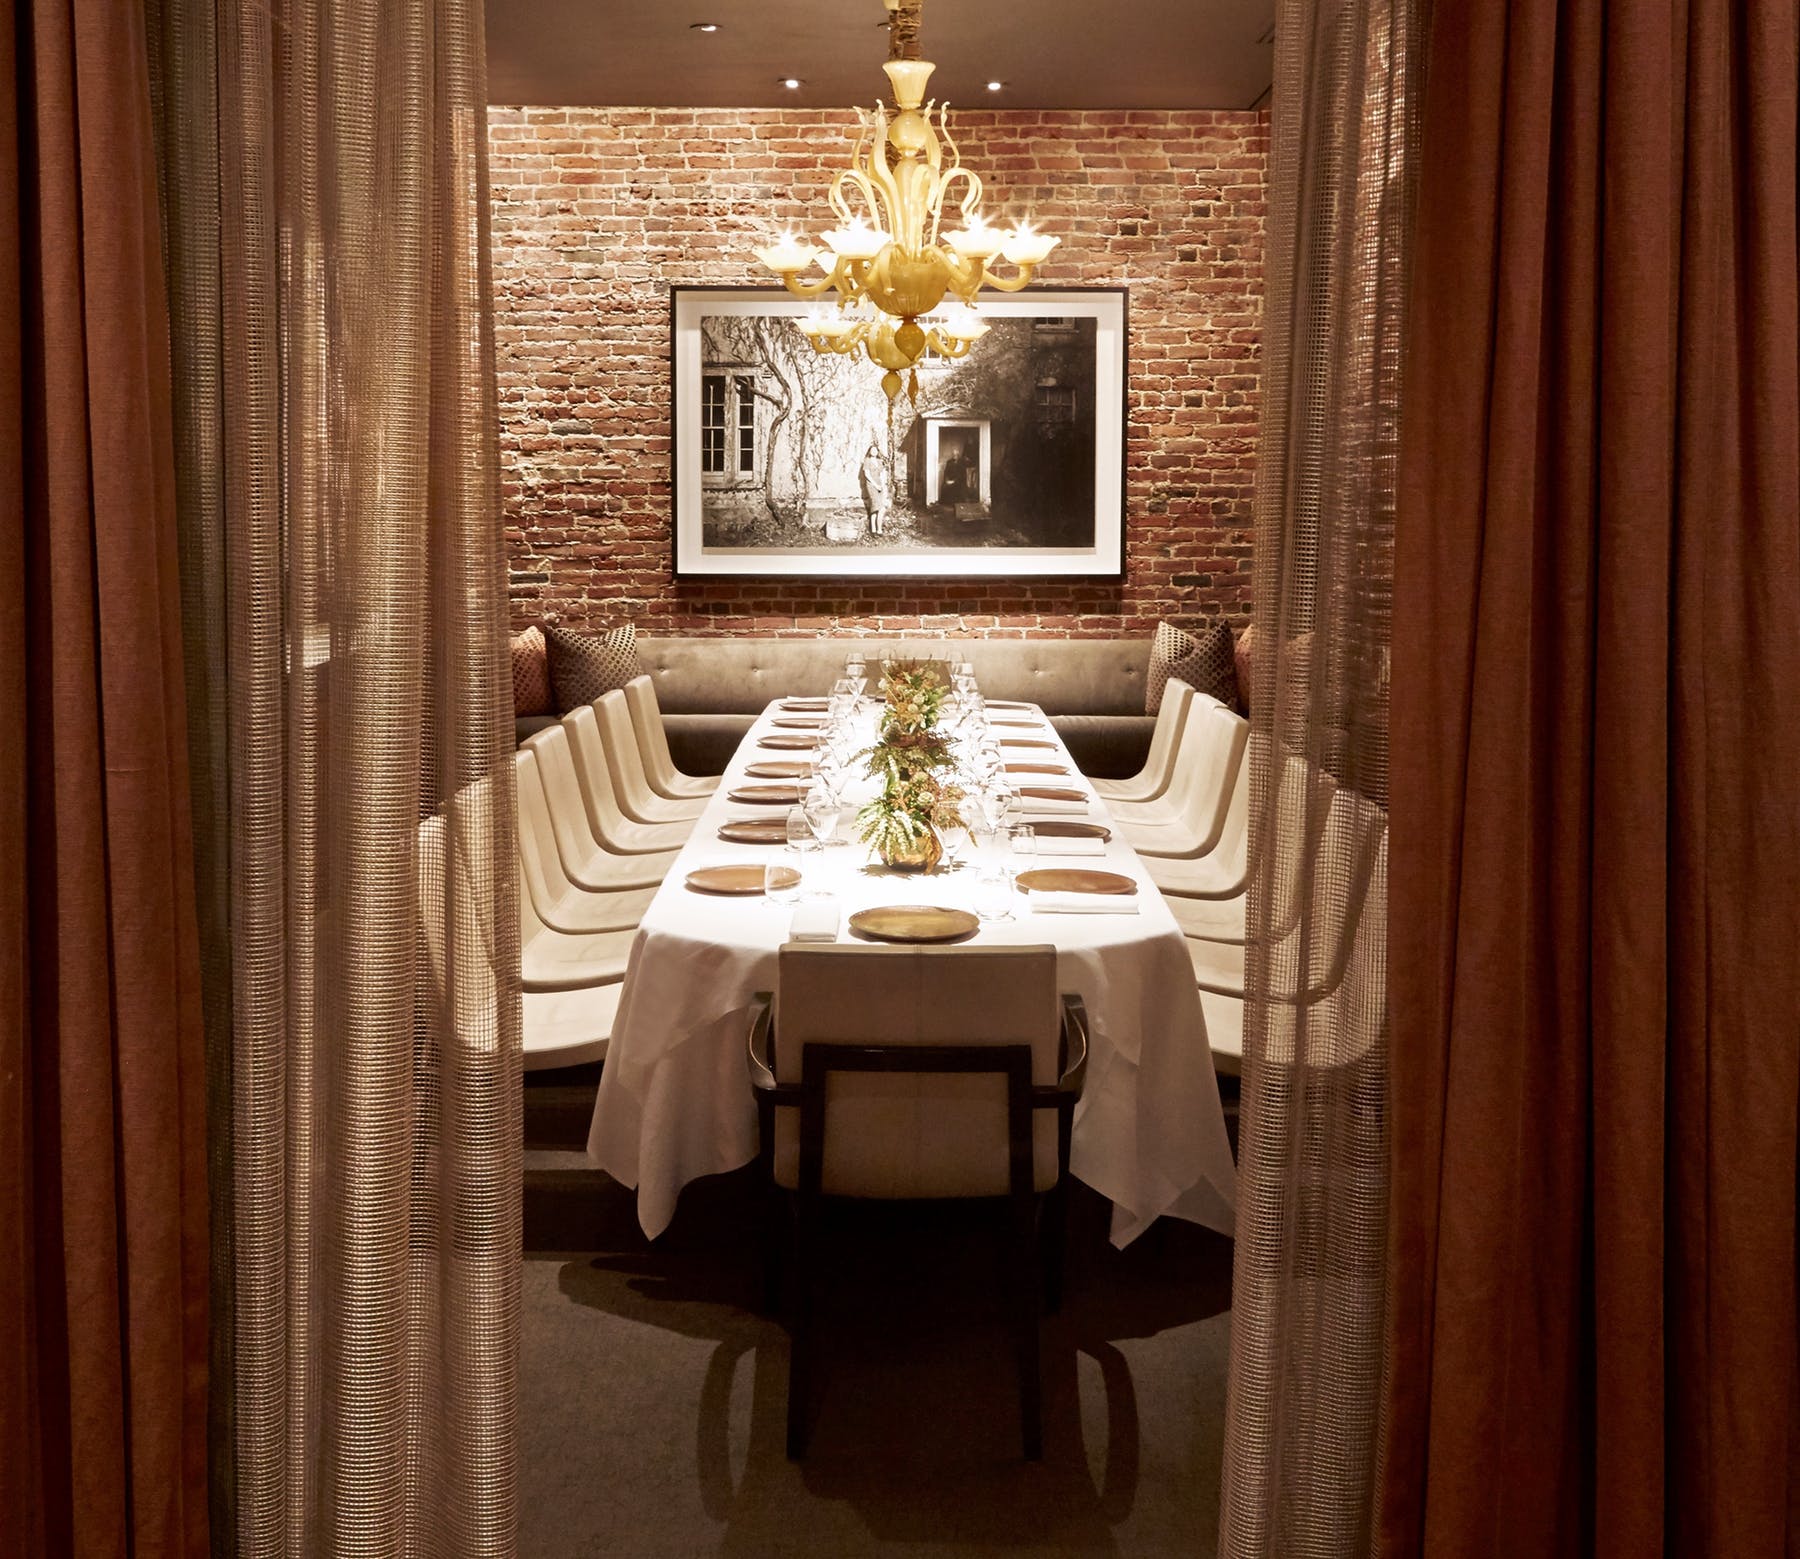 The private dining room at three-starred Quince in San Francisco.